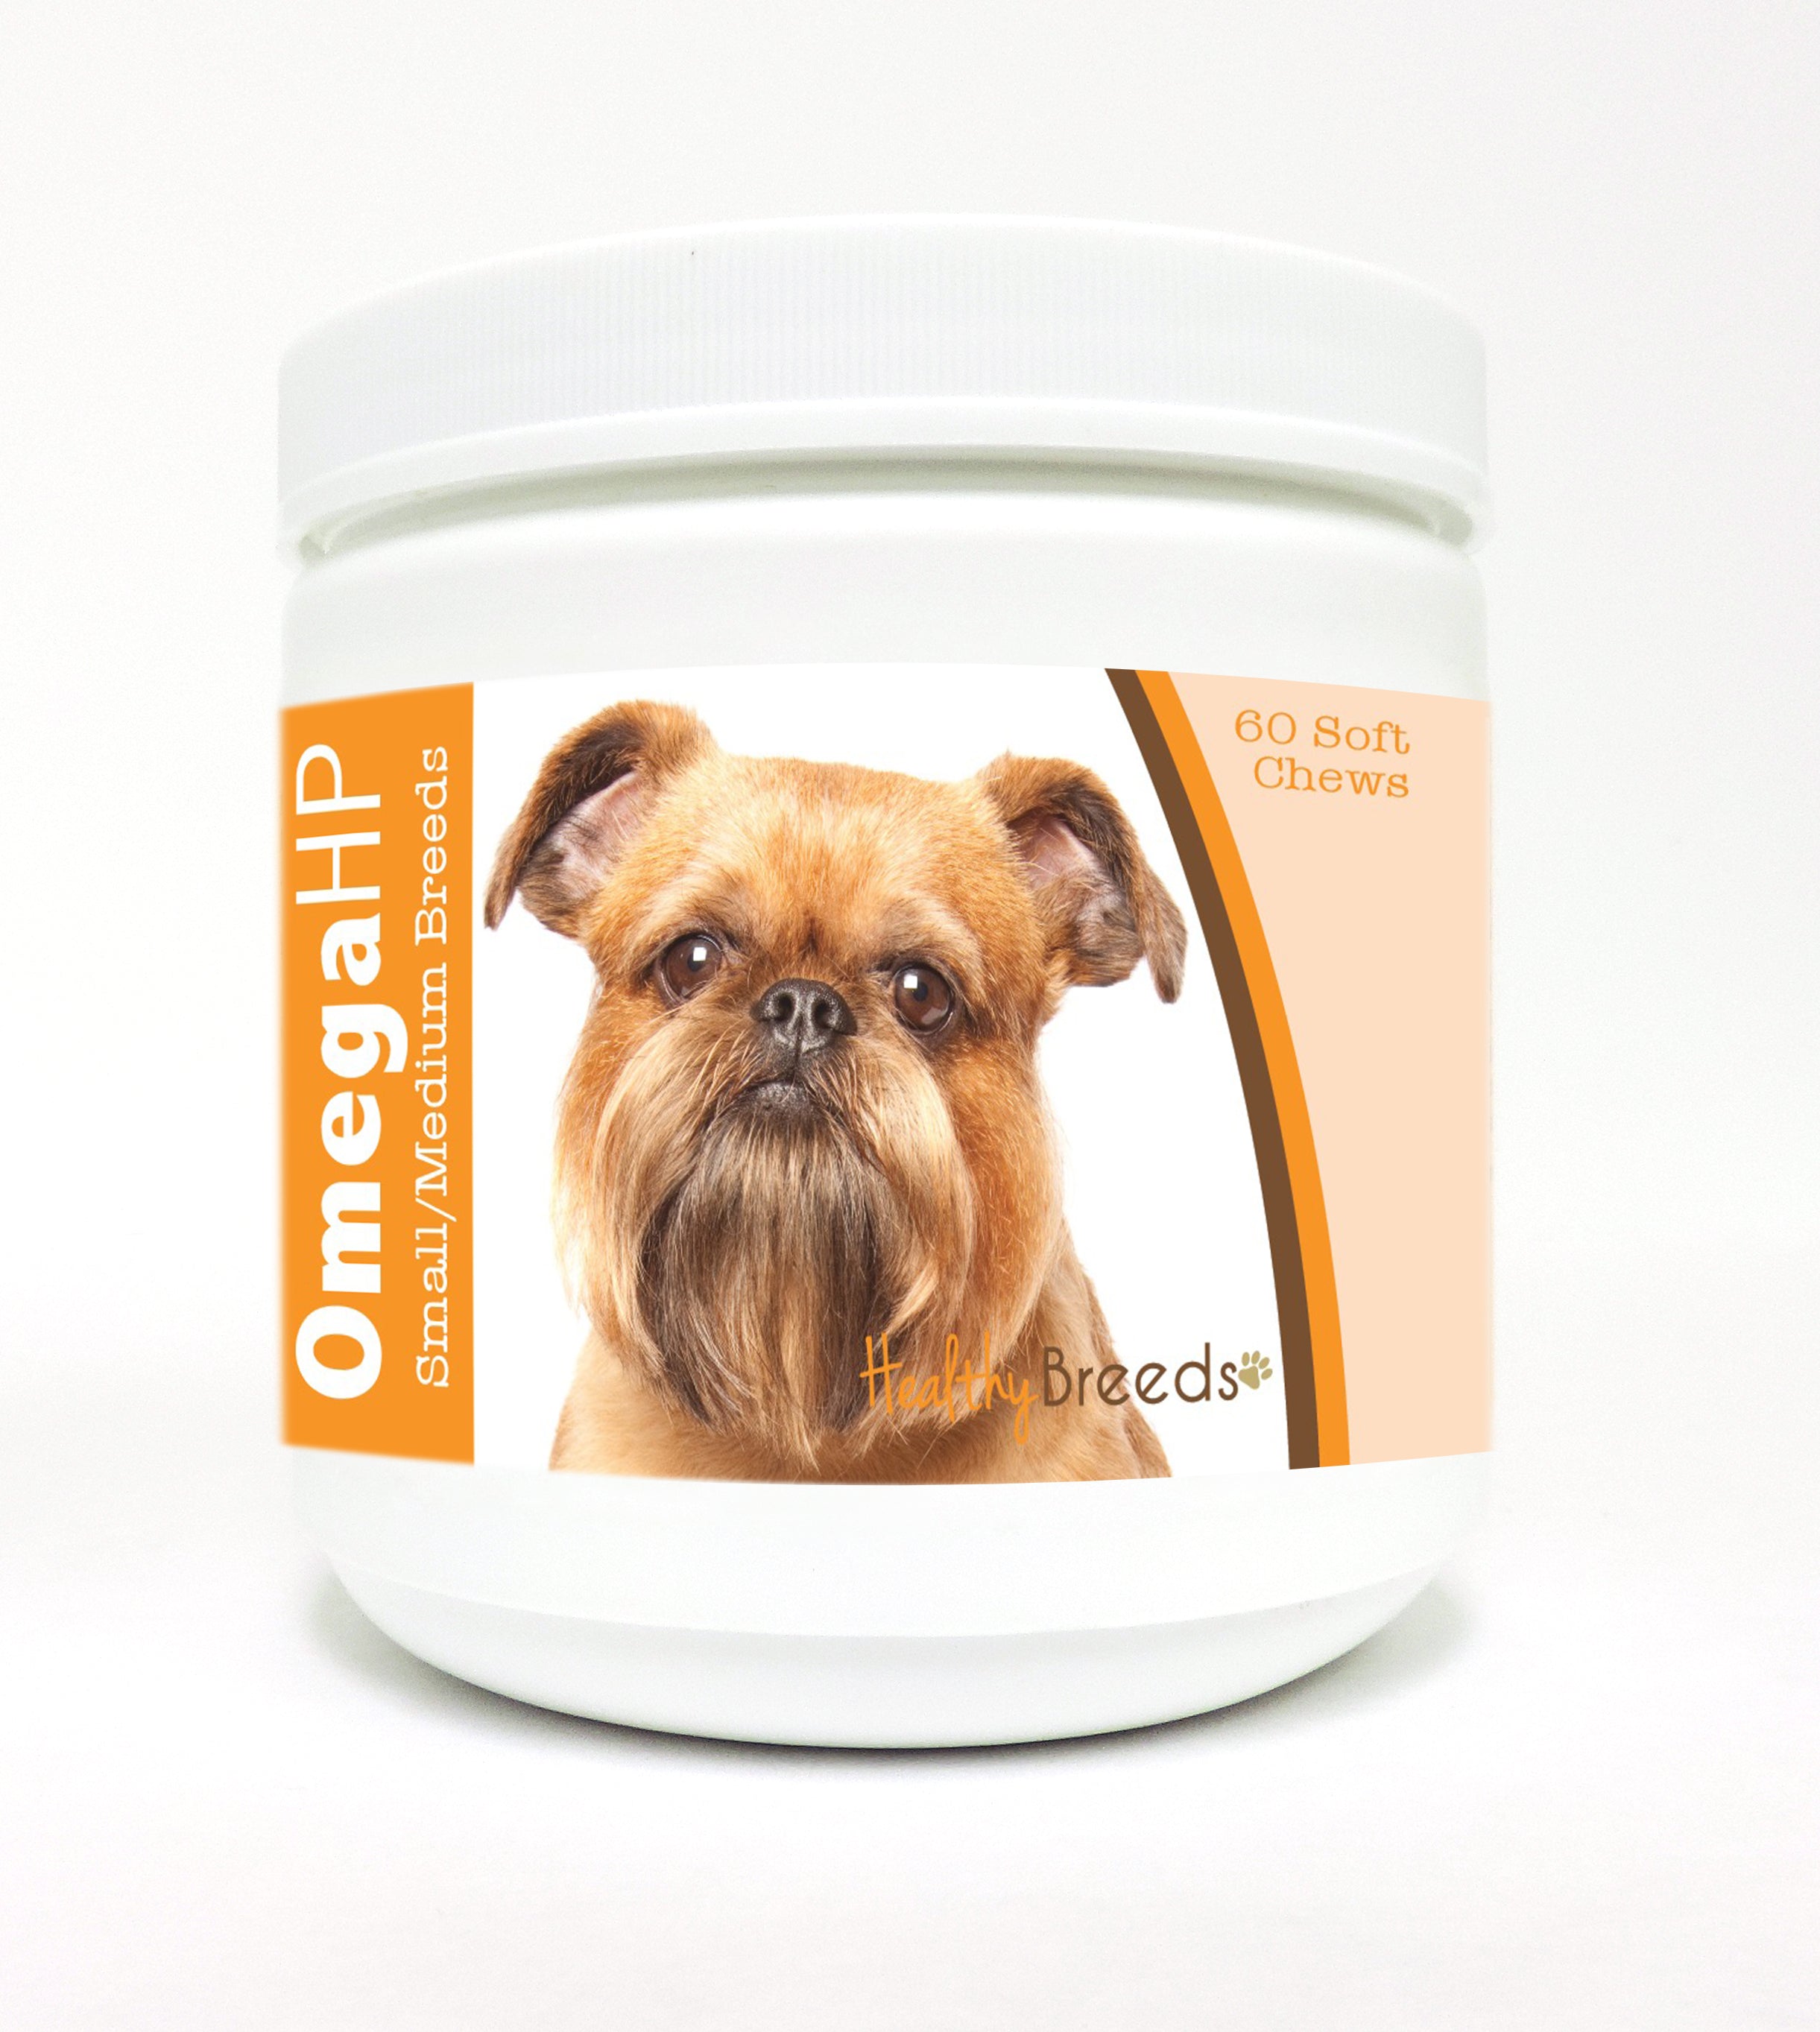 Brussels Griffon Omega HP Fatty Acid Skin and Coat Support Soft Chews 60 Count